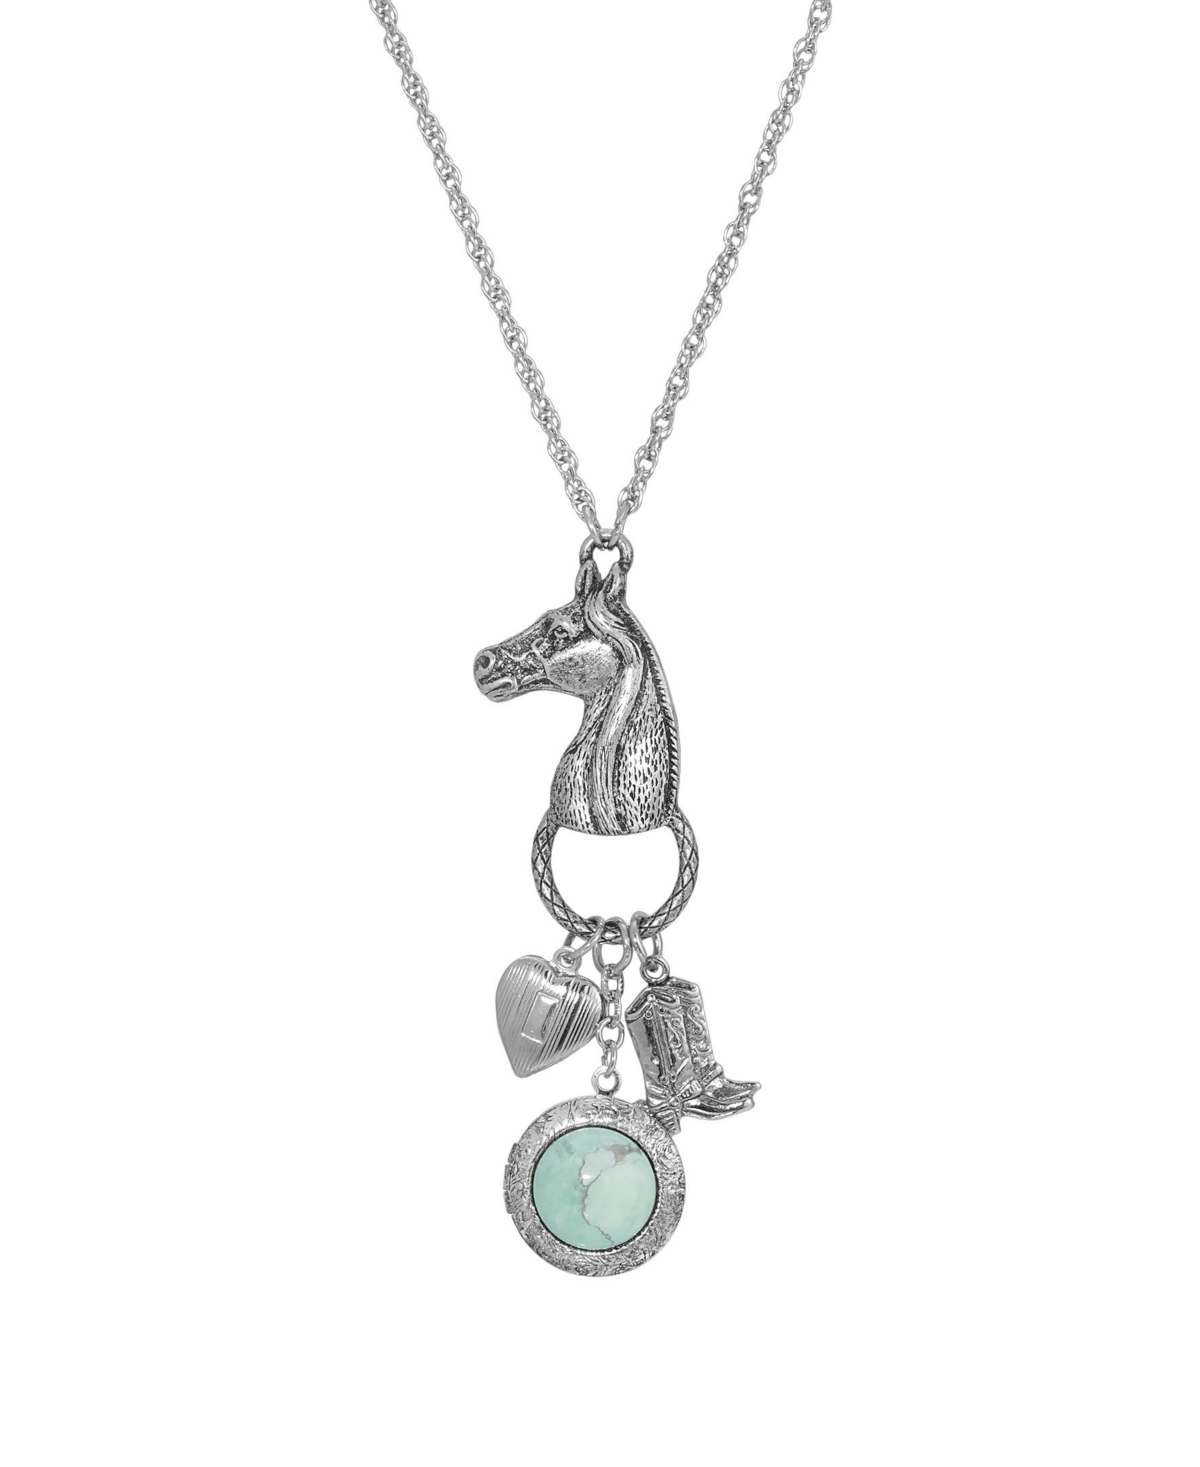 Horse Head with Heart and Boot Charm Necklace - Turquoise